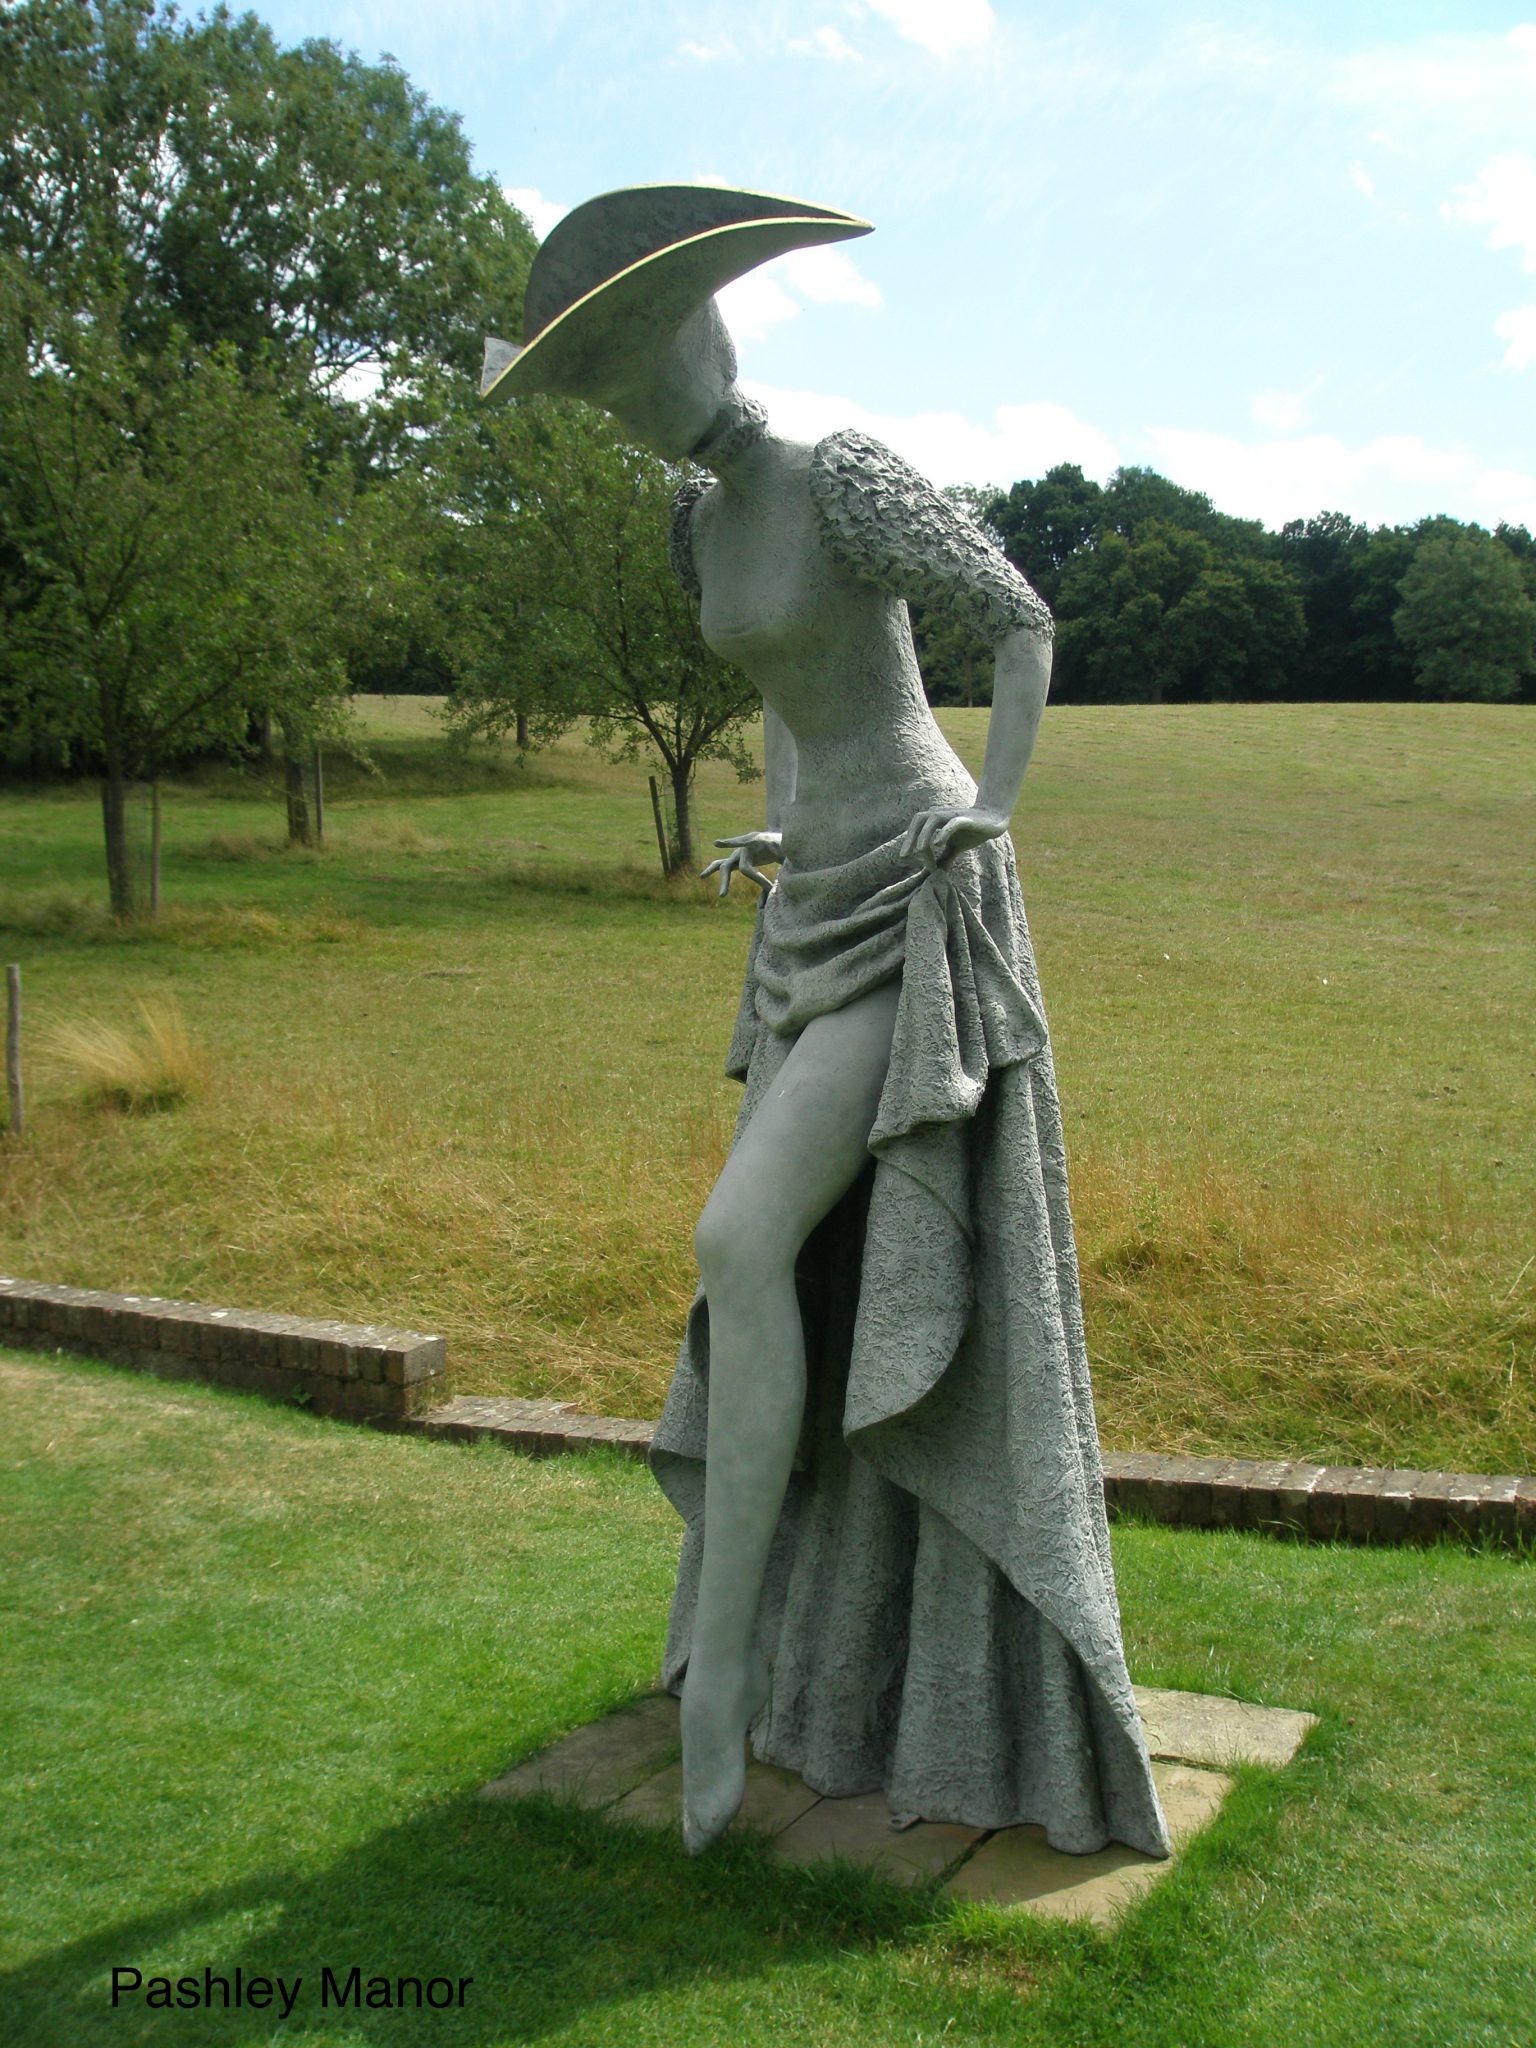 At the edge of the Ha-Ha that separates the gardens from sheep meadows, this 8 foot tall lady exposes her shapely leg.